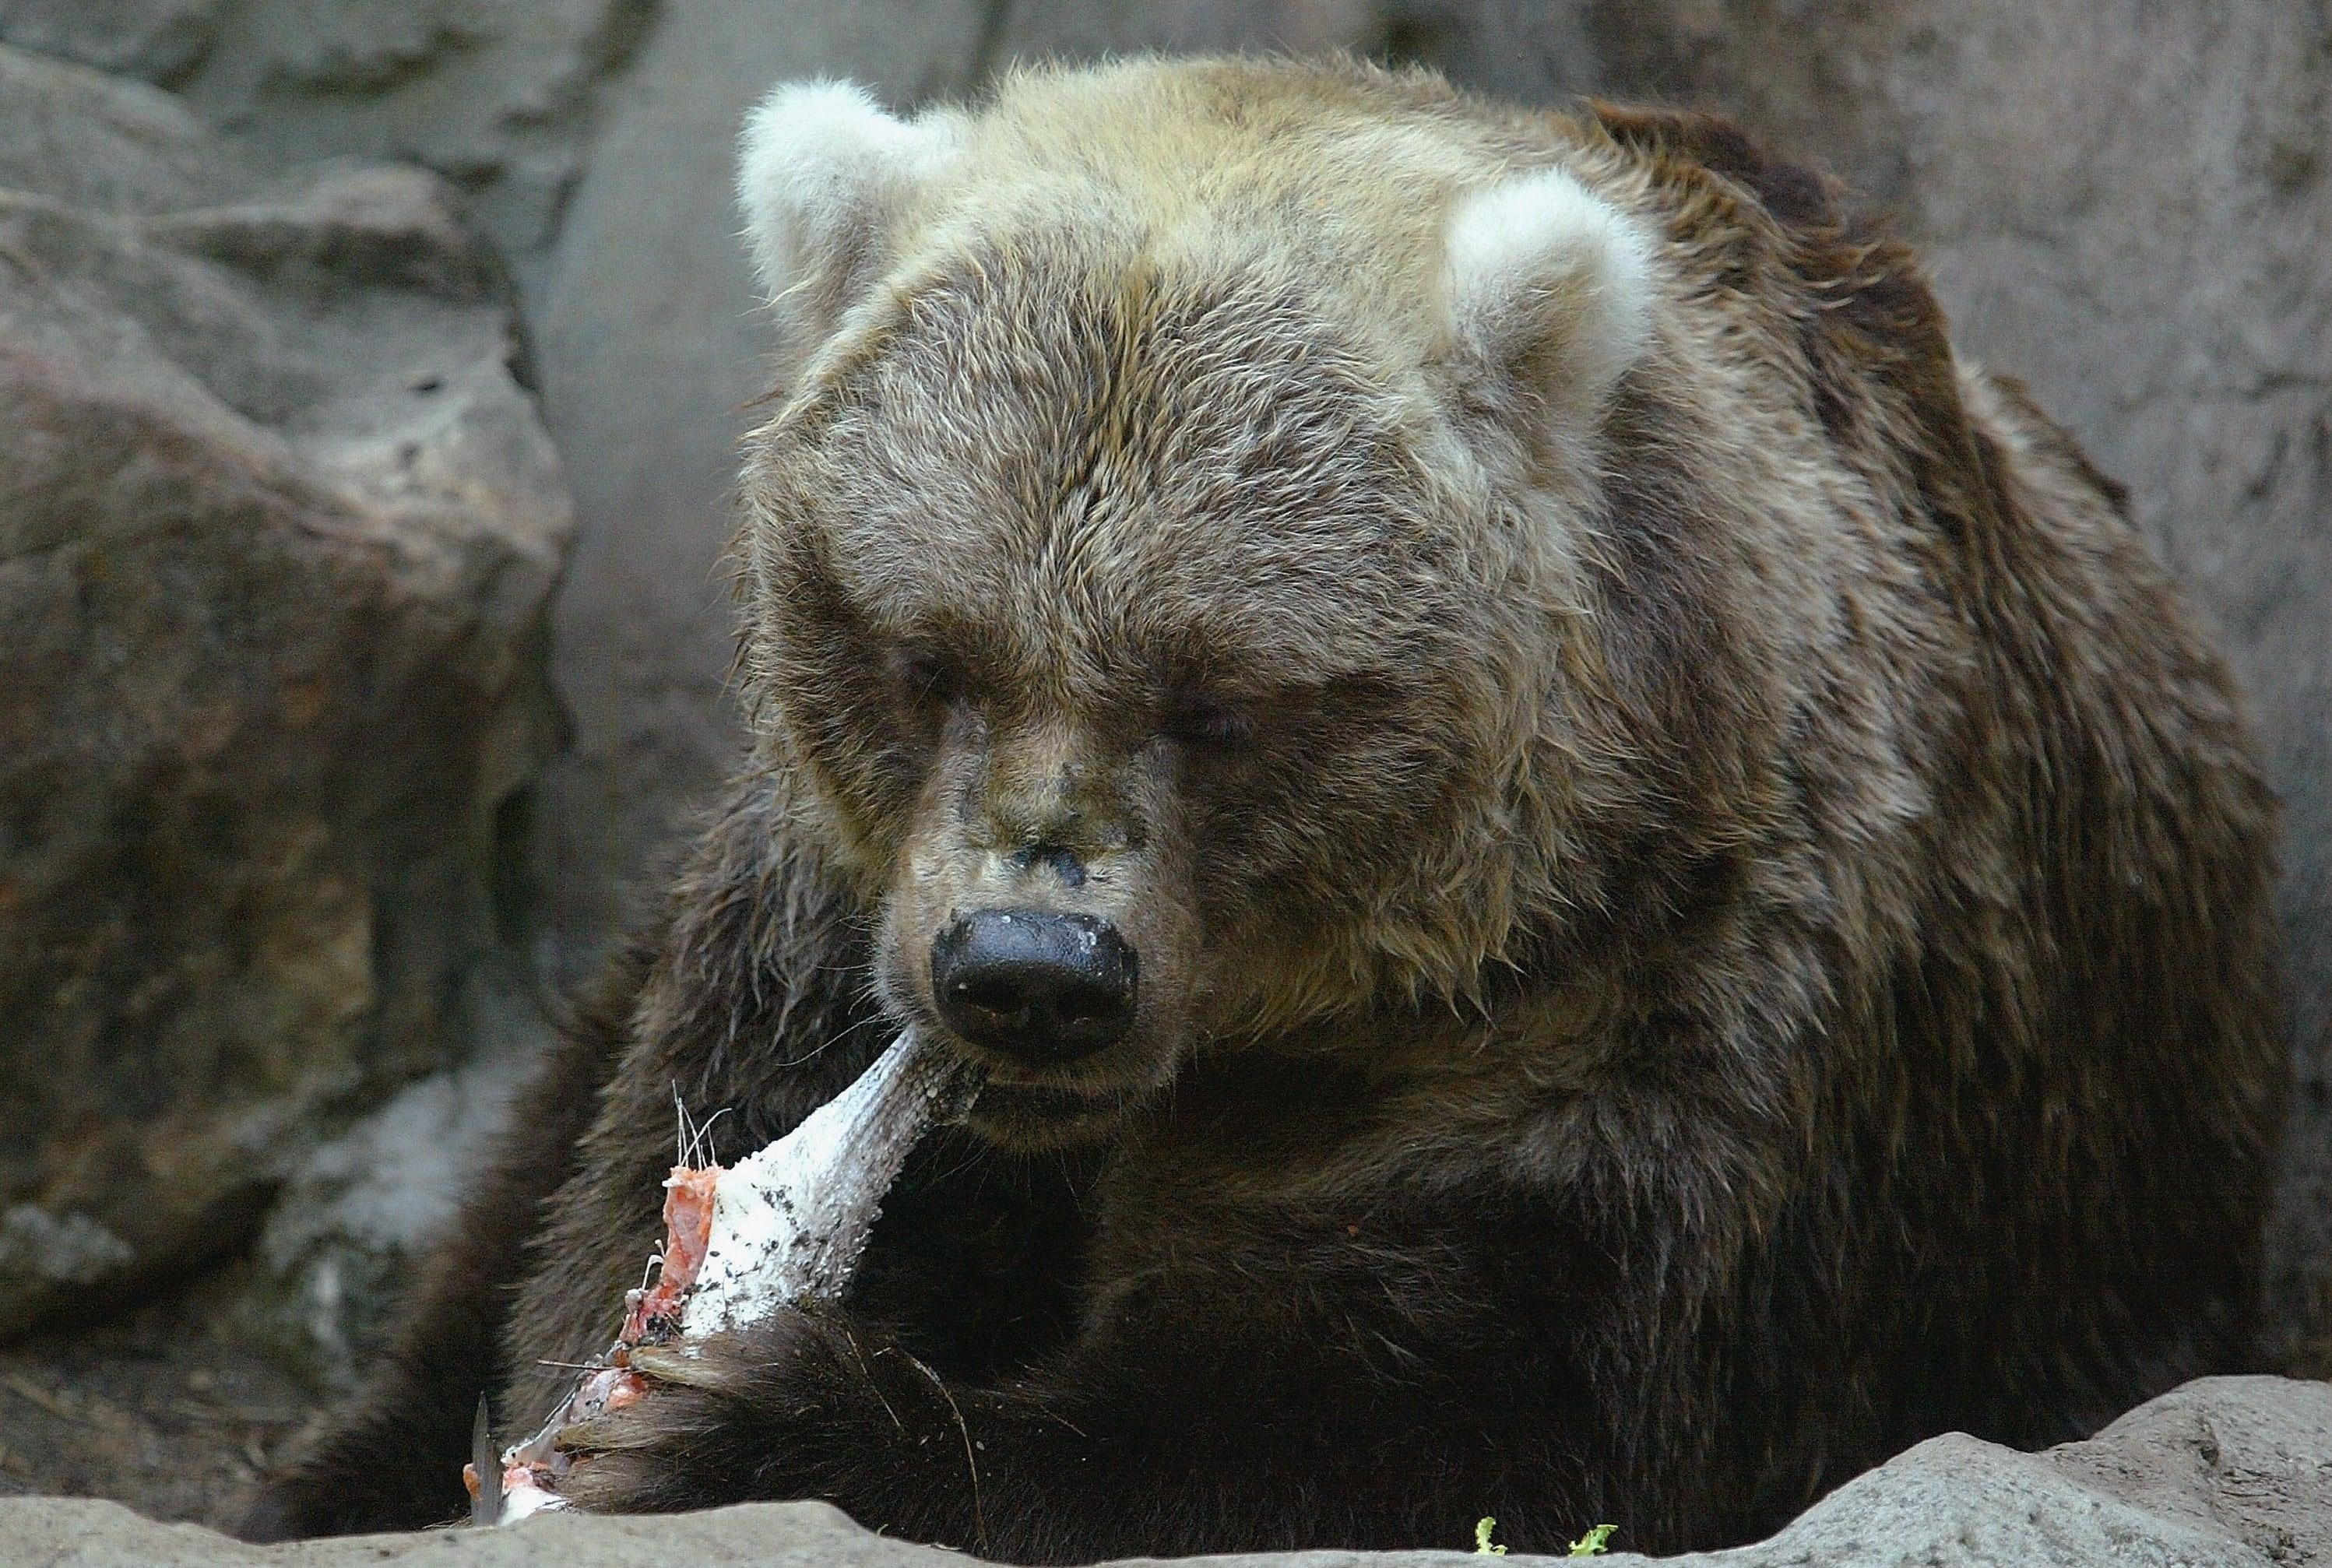 A brown bear chewin' on salmon. (Photo: Mark Metcalfe, Getty Images)